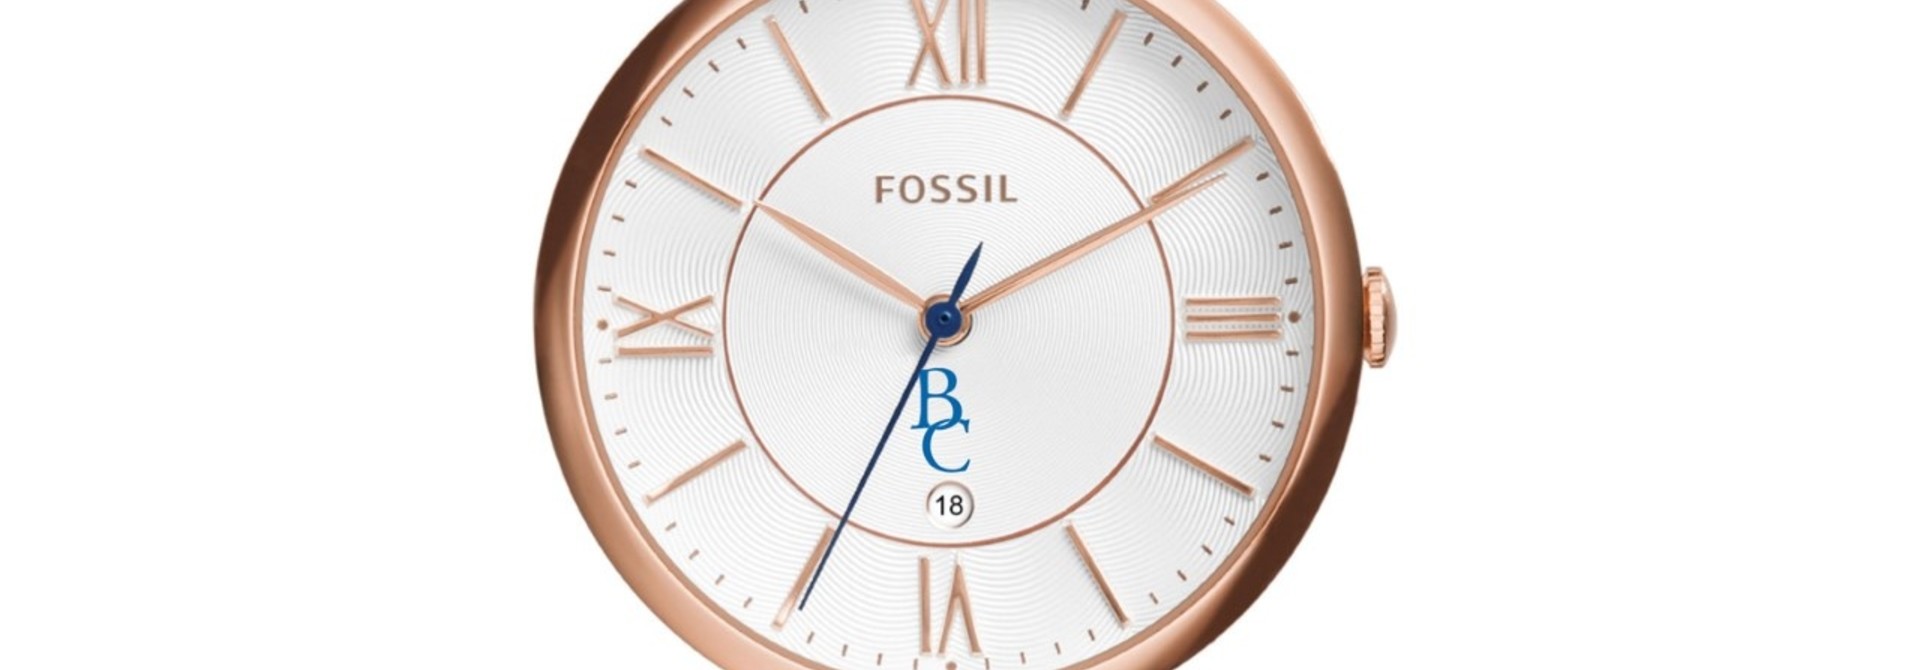 Ladies BC Fossil Watch